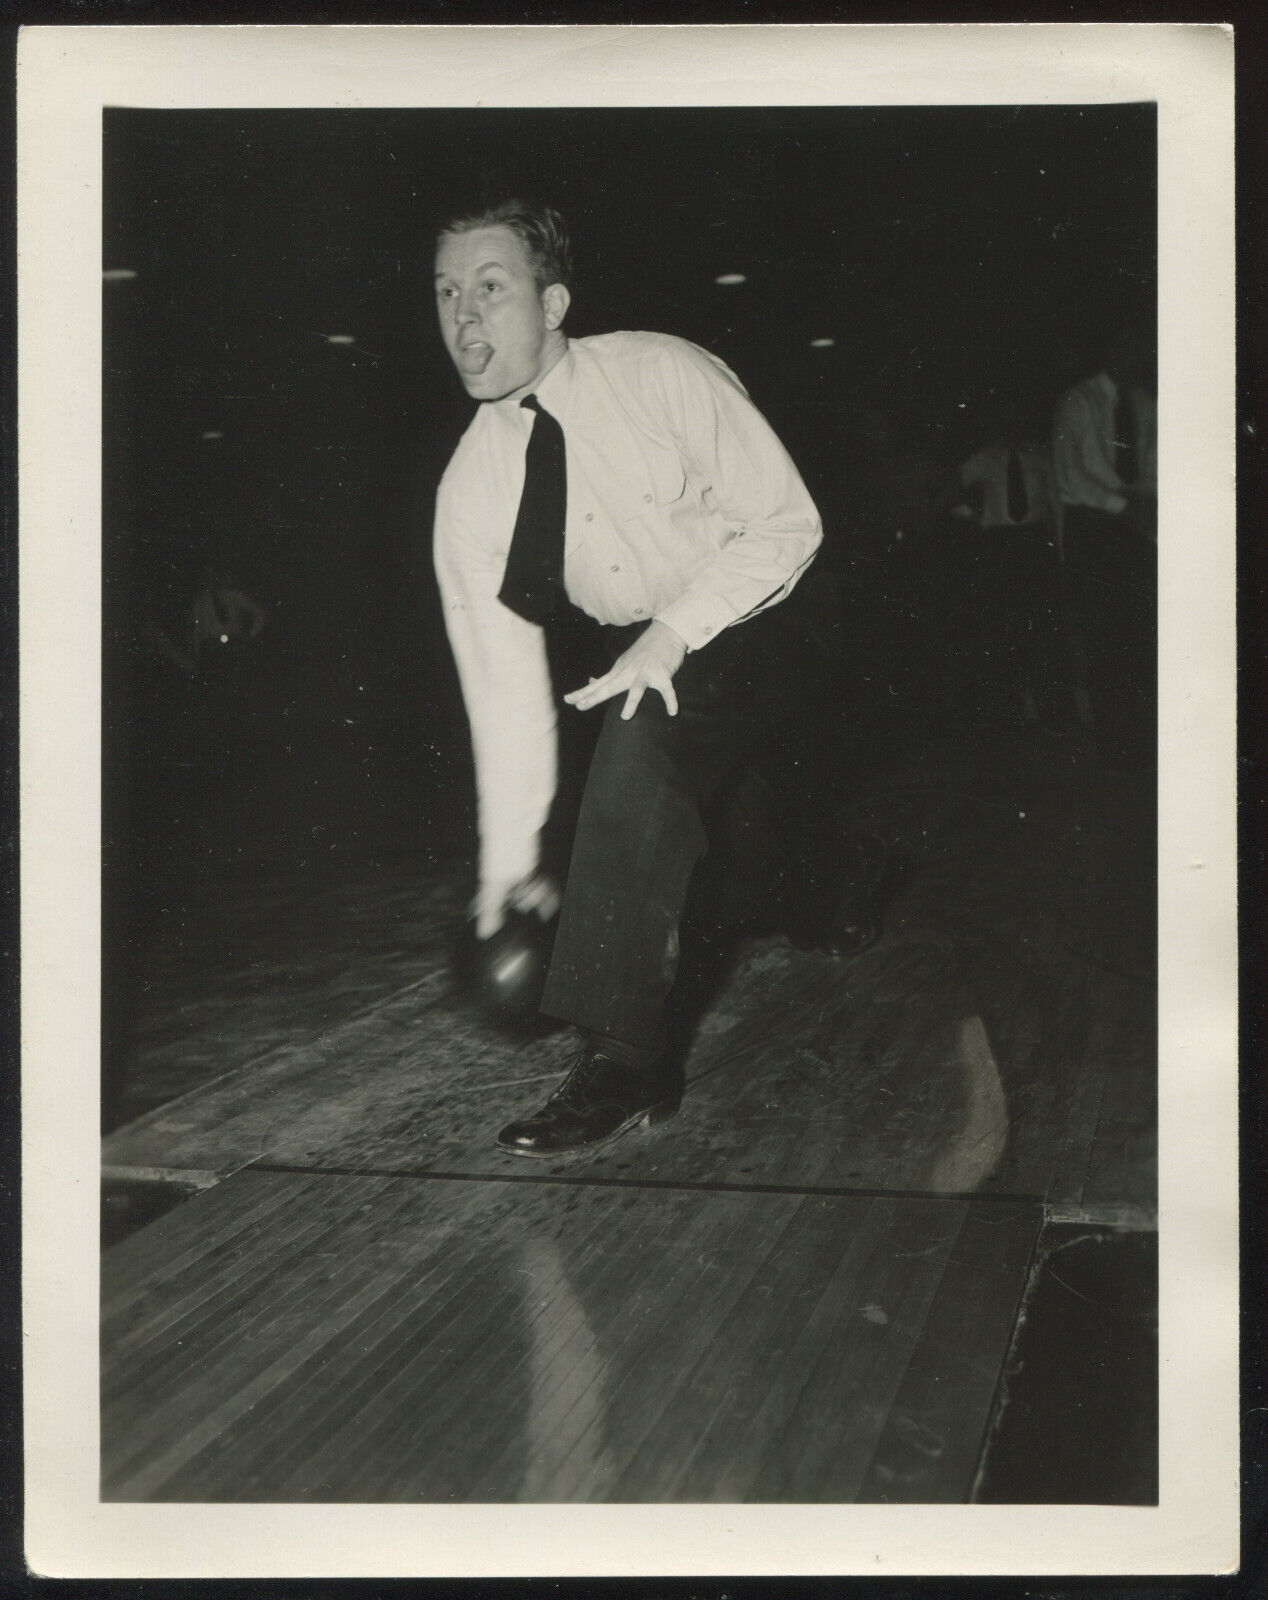 FOUND PHOTO Funny Face Guy Bowling 1950s Motion Blur Odd Unusual Snapshot VTG